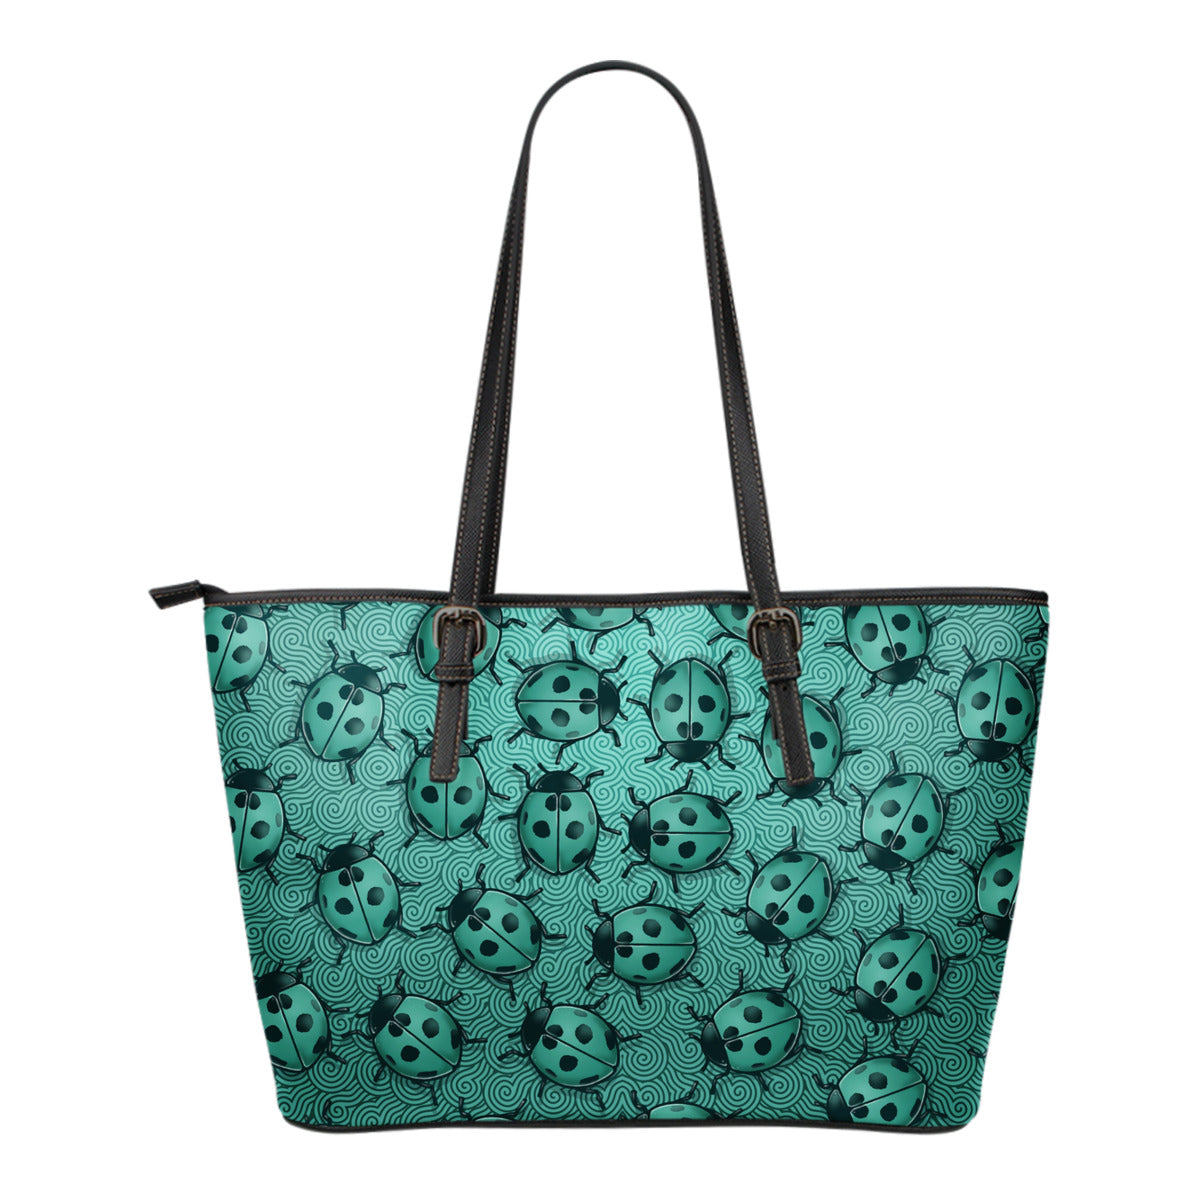 Lady Bug Swirl Small Leather Tote Bag - Teal